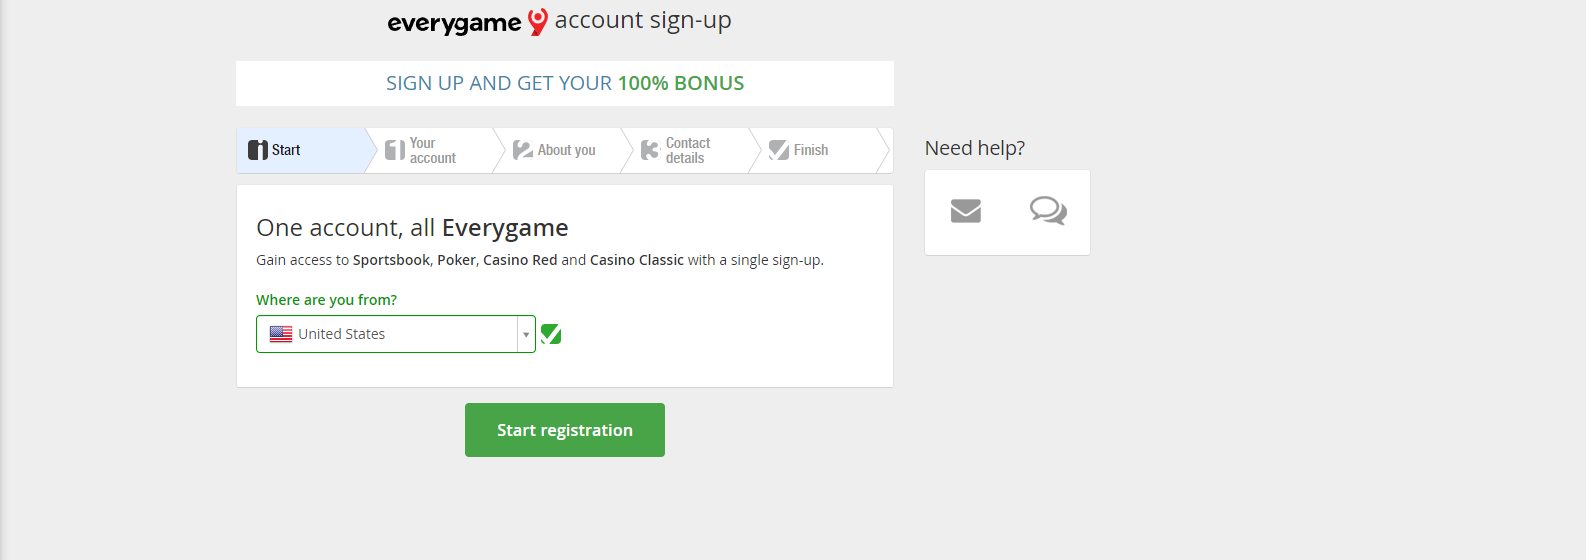 EveryGame Classic Casino Login Page Every Game